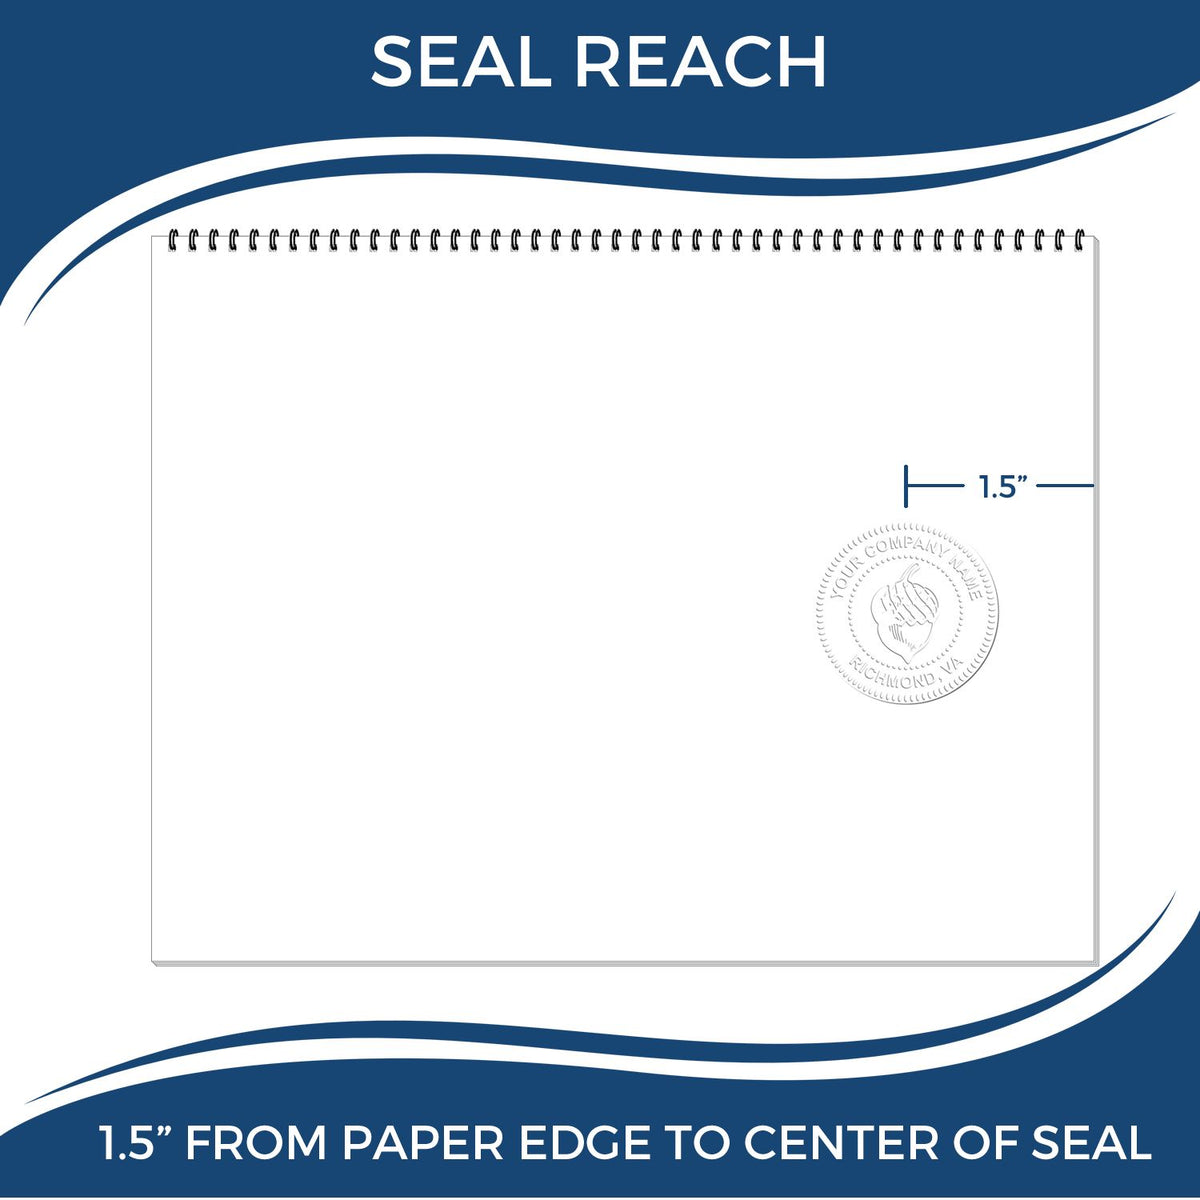 An infographic showing the seal reach which is represented by a ruler and a miniature seal image of the Gift Rhode Island Land Surveyor Seal